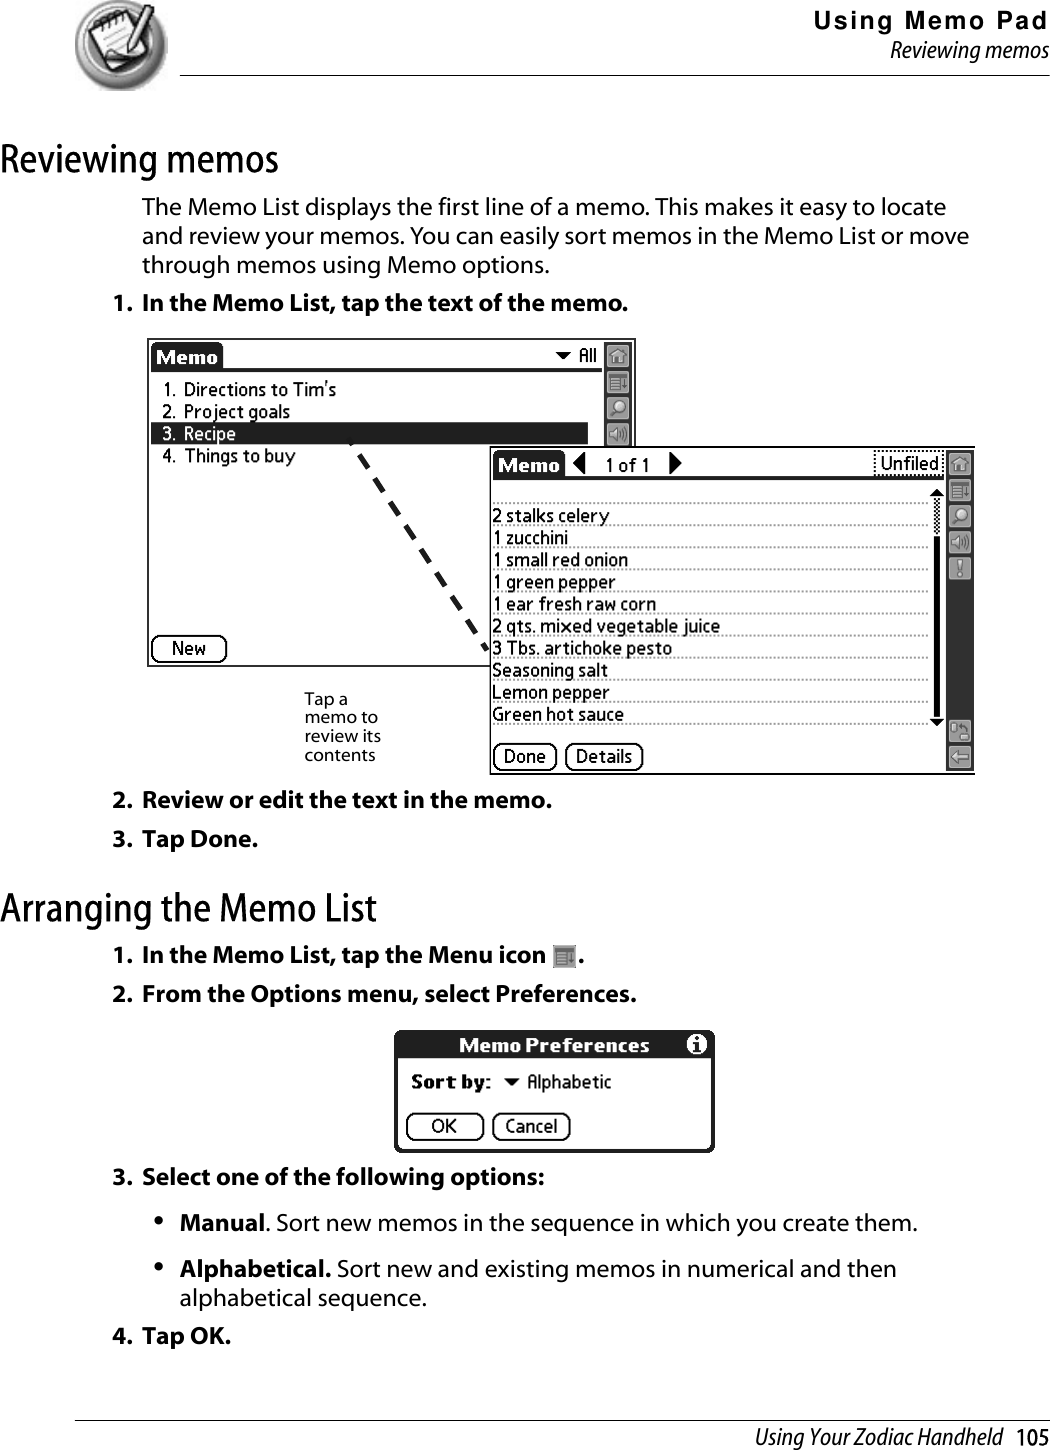 Using Memo PadReviewing memosUsing Your Zodiac Handheld   105Reviewing memosThe Memo List displays the first line of a memo. This makes it easy to locate and review your memos. You can easily sort memos in the Memo List or move through memos using Memo options.1. In the Memo List, tap the text of the memo.2. Review or edit the text in the memo. 3. Tap Done.Arranging the Memo List1. In the Memo List, tap the Menu icon  .2. From the Options menu, select Preferences.3. Select one of the following options:•Manual. Sort new memos in the sequence in which you create them.•Alphabetical. Sort new and existing memos in numerical and then alphabetical sequence. 4. Tap OK.Tap a memo to review its contents